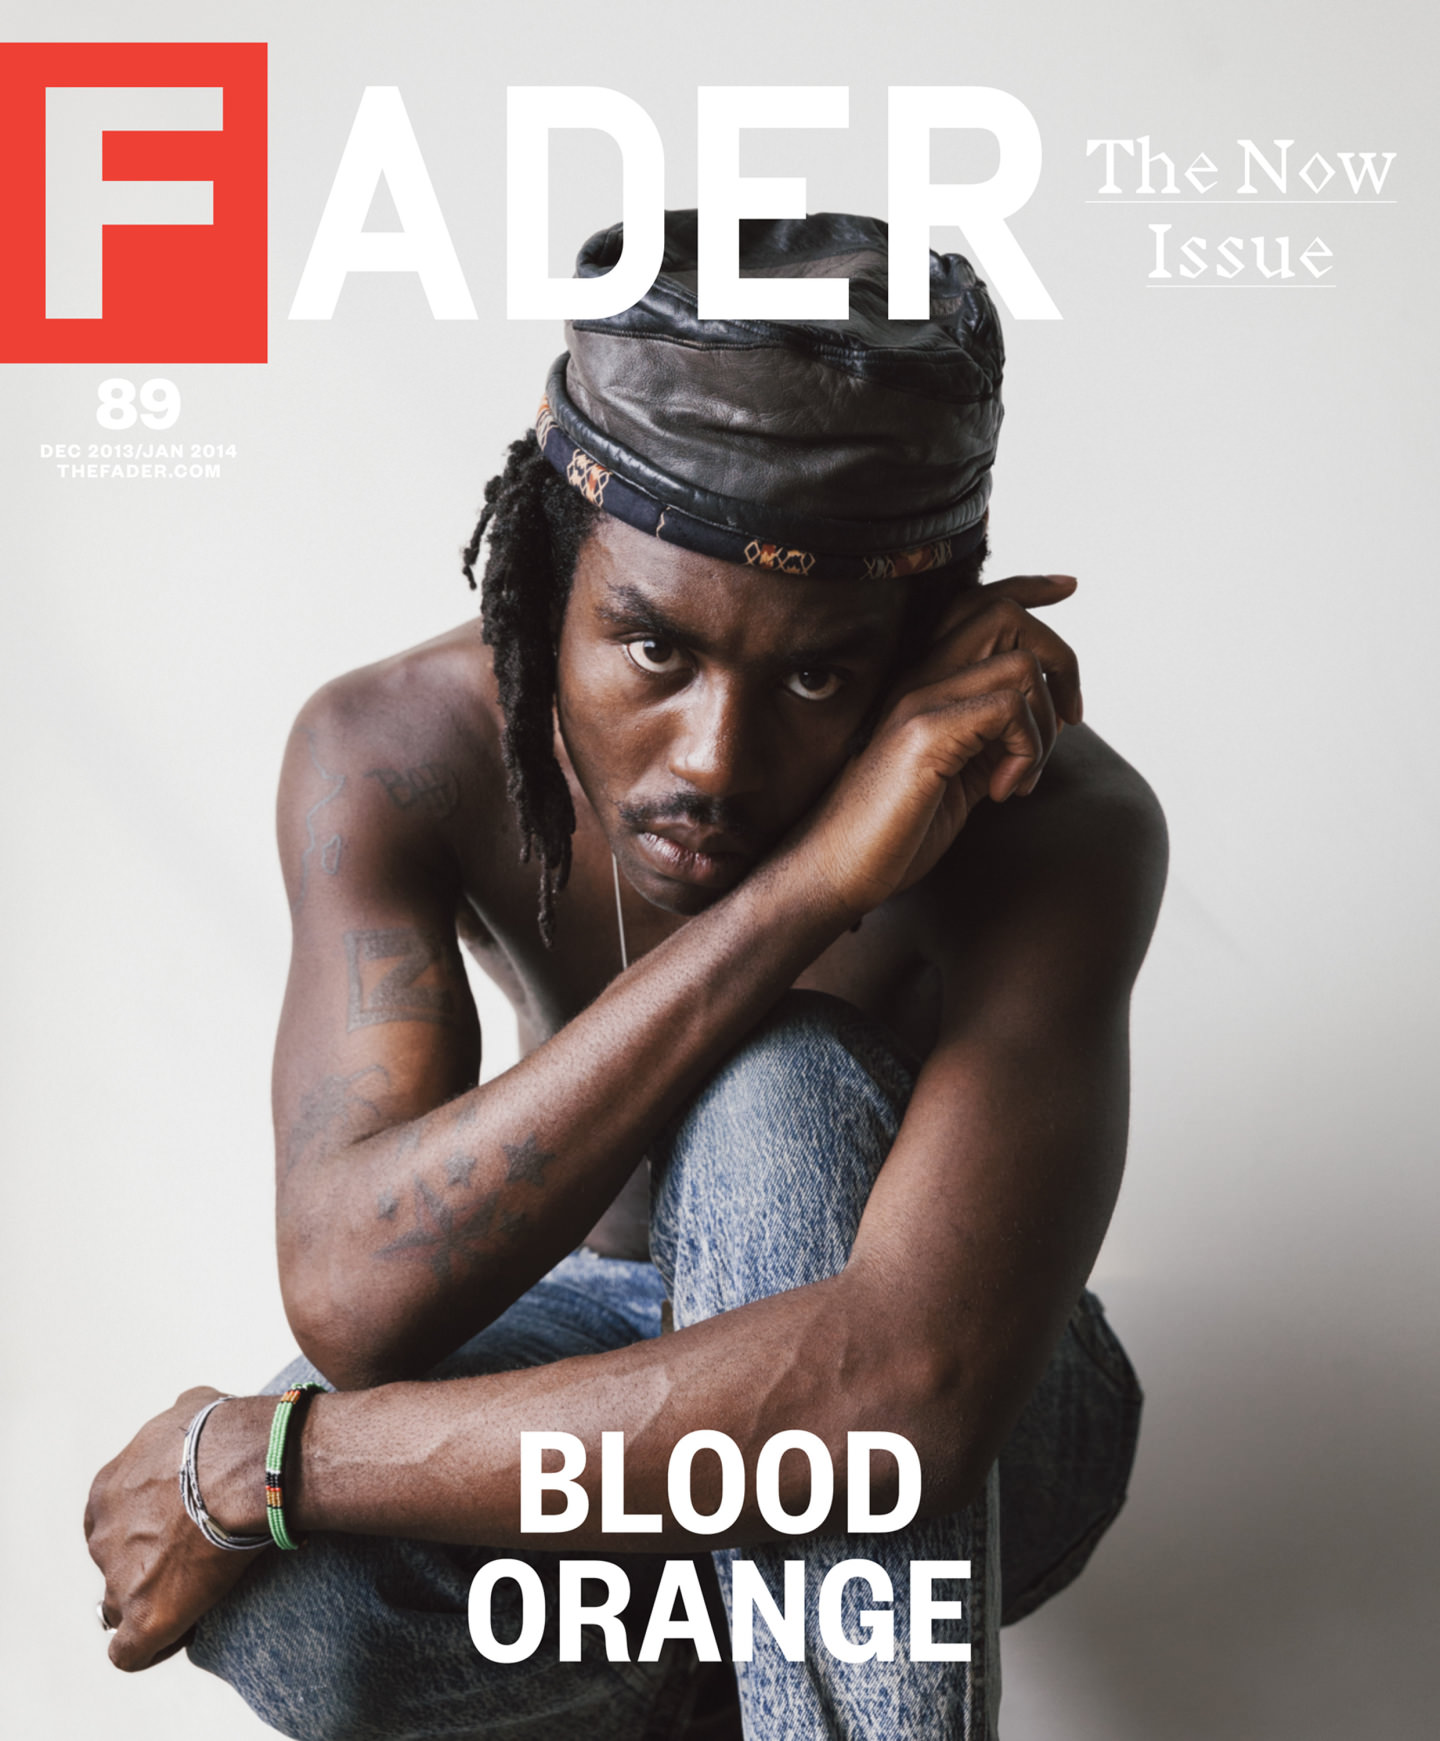 <a href="http://www.thefader.com/2013/11/19/blood-orange-hitting-the-right-notes" target="_Blank">FADER</a>